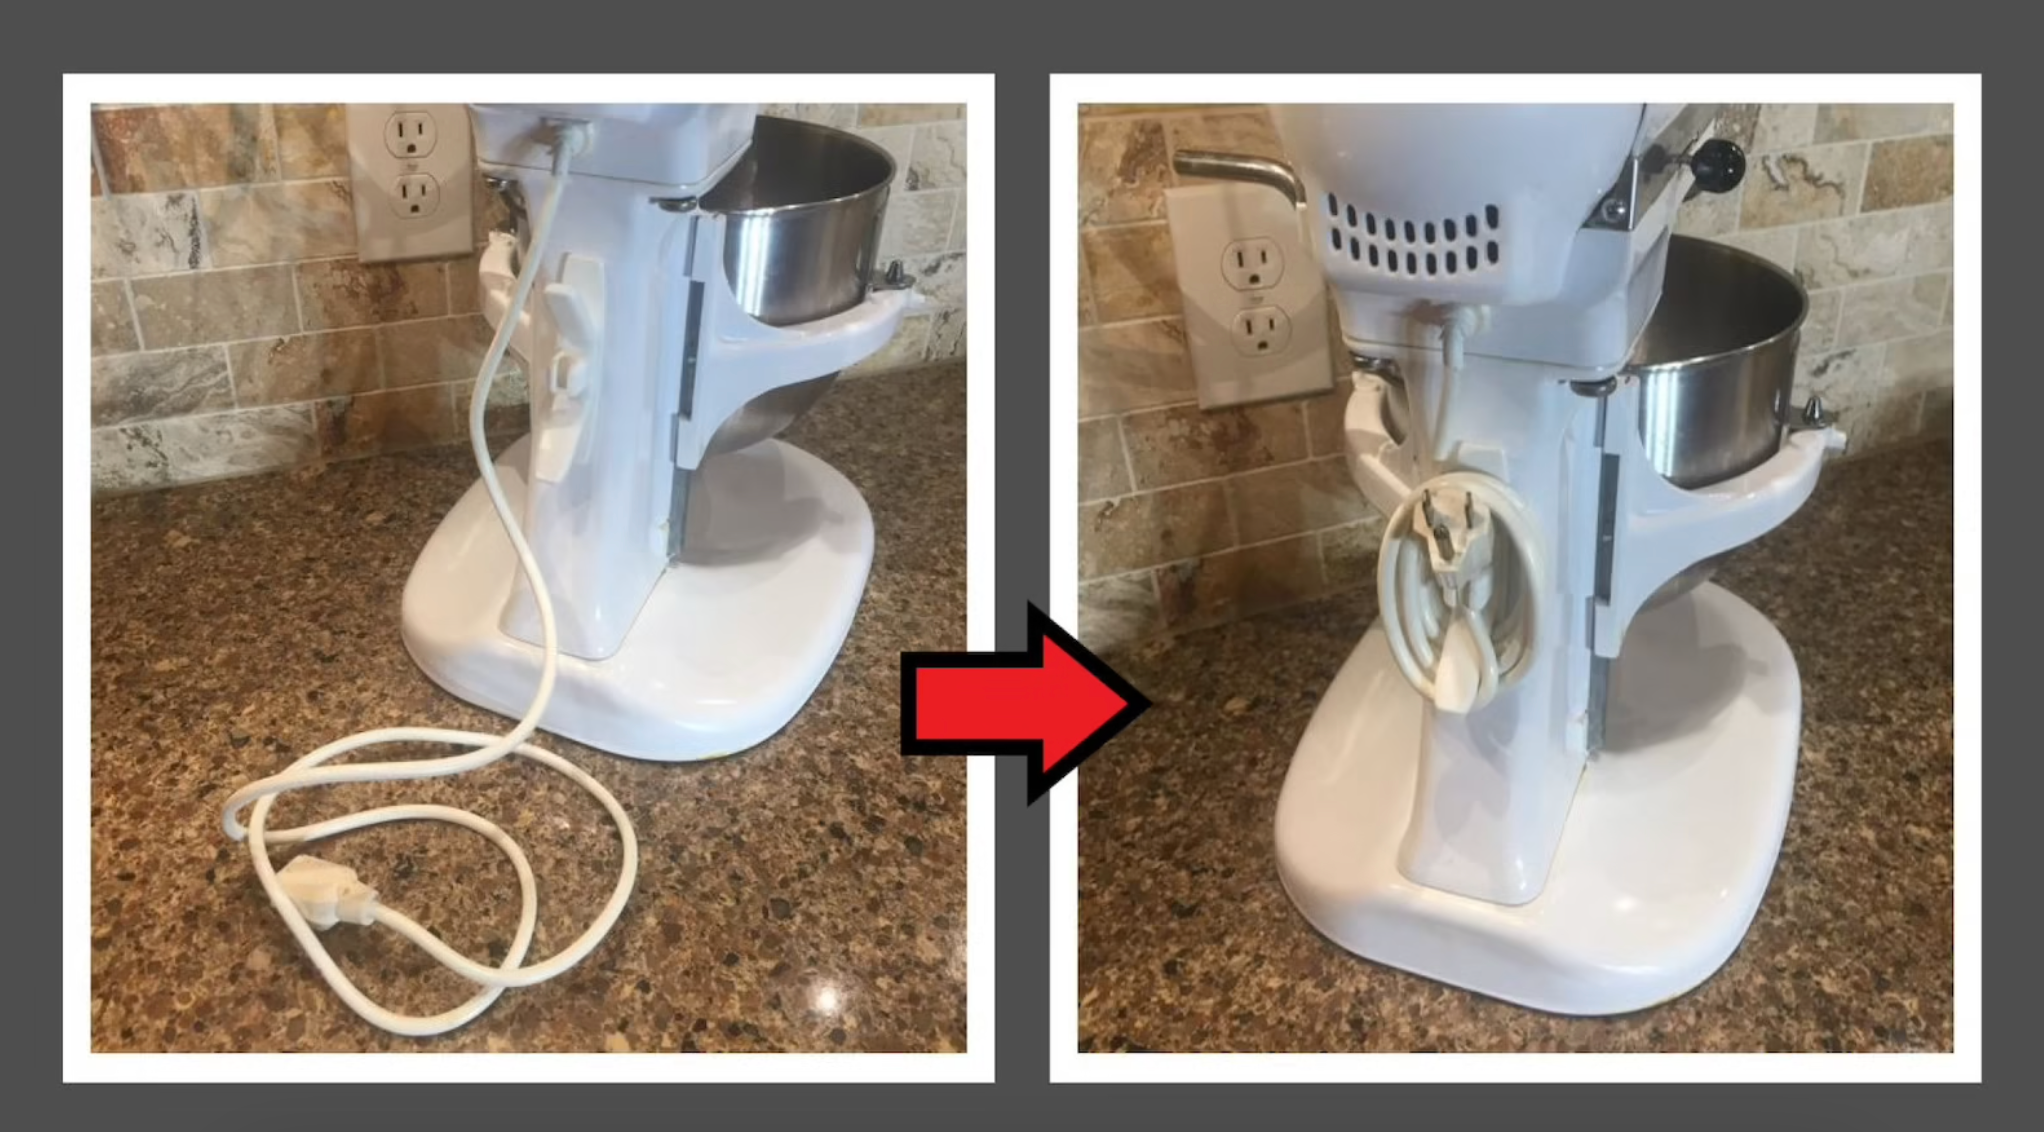 stand mixer with cord and then the same stand mixer with cord coiled up neatly